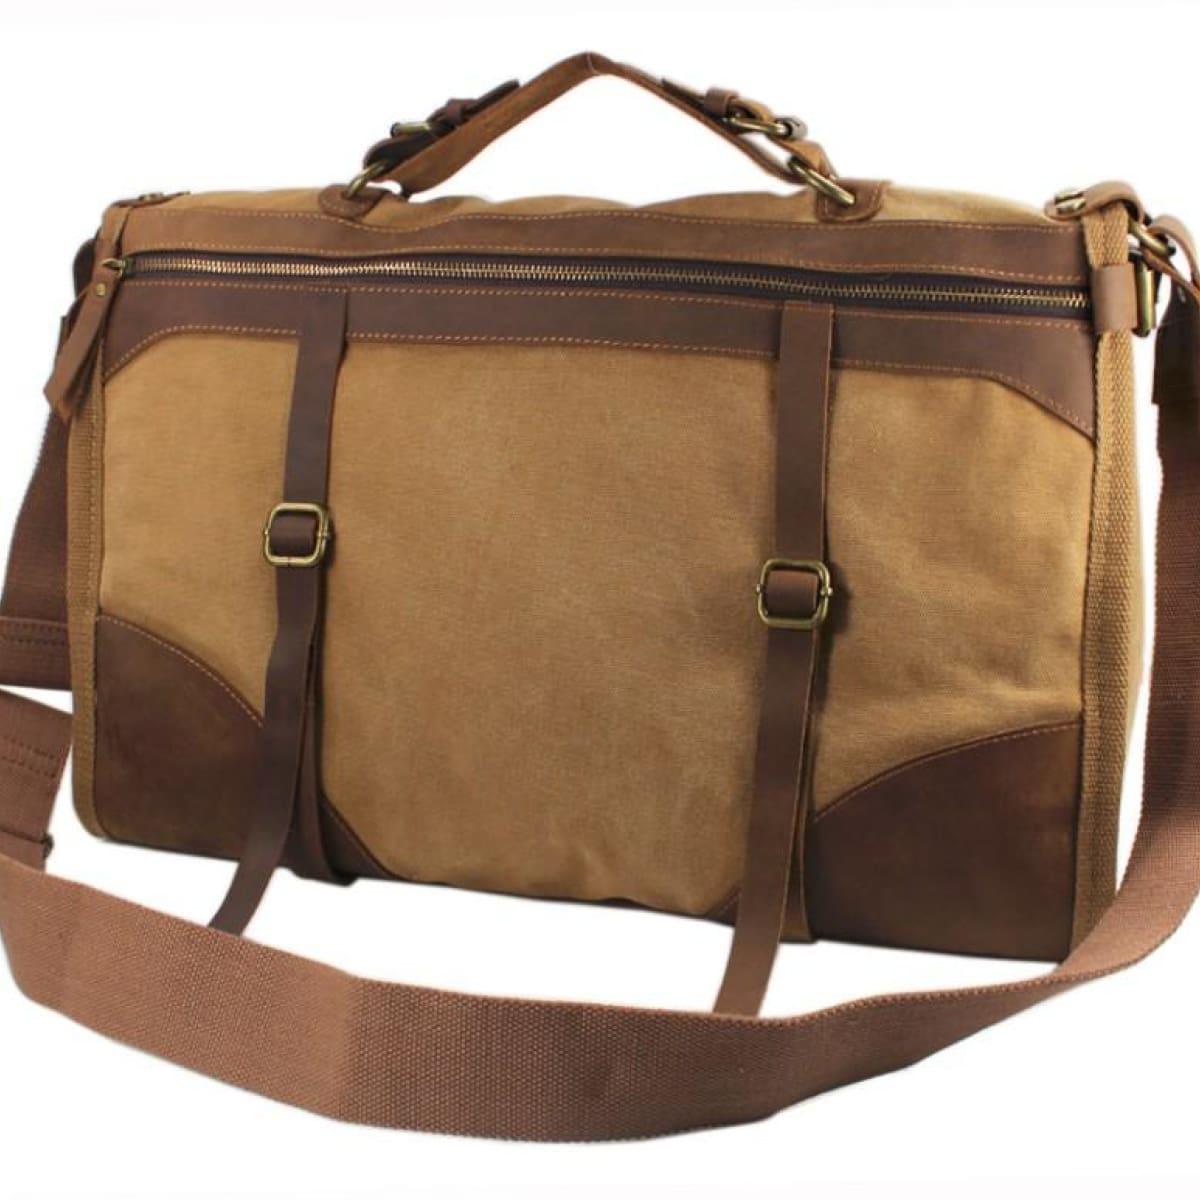 M1 Military Canvas + Leather Weekender Duffle Bag